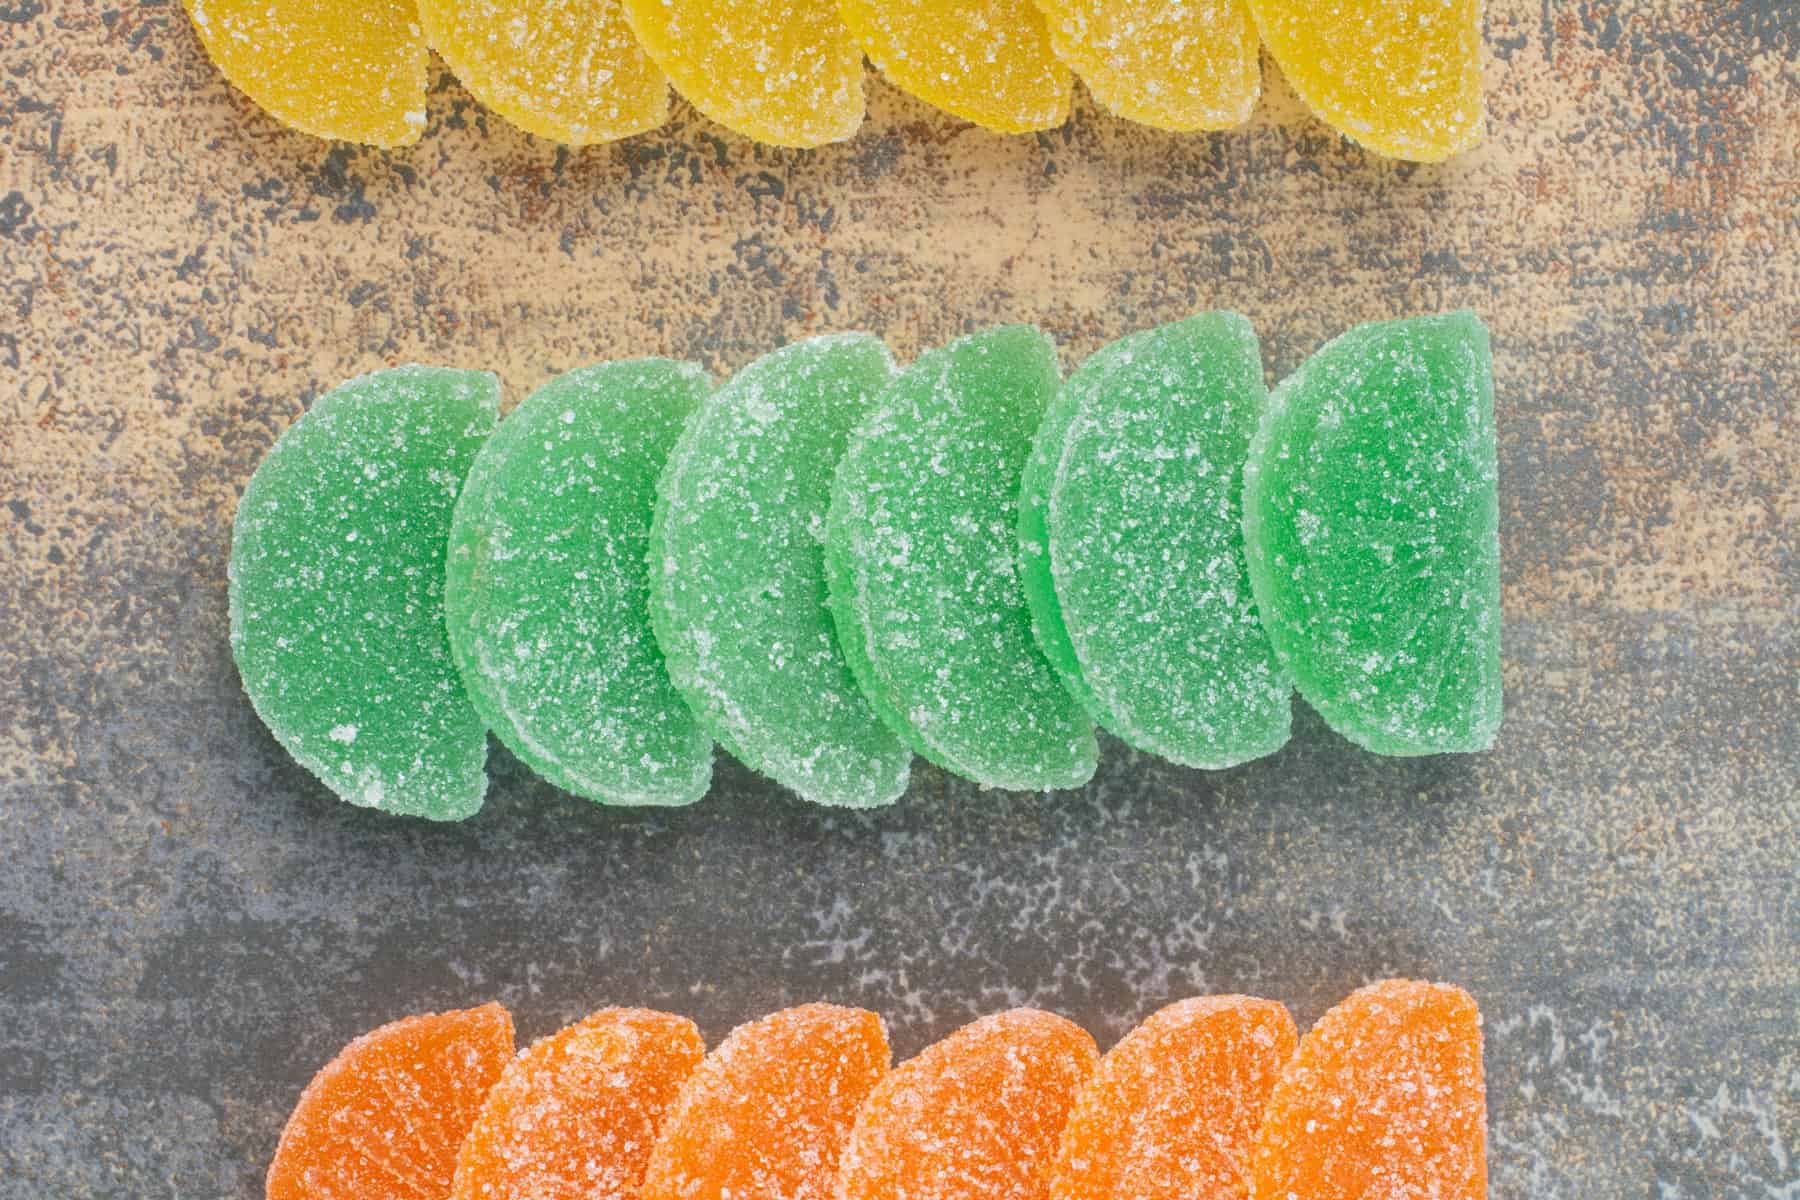 What to Consider When Deciding How Many CBD Gummies to Eat